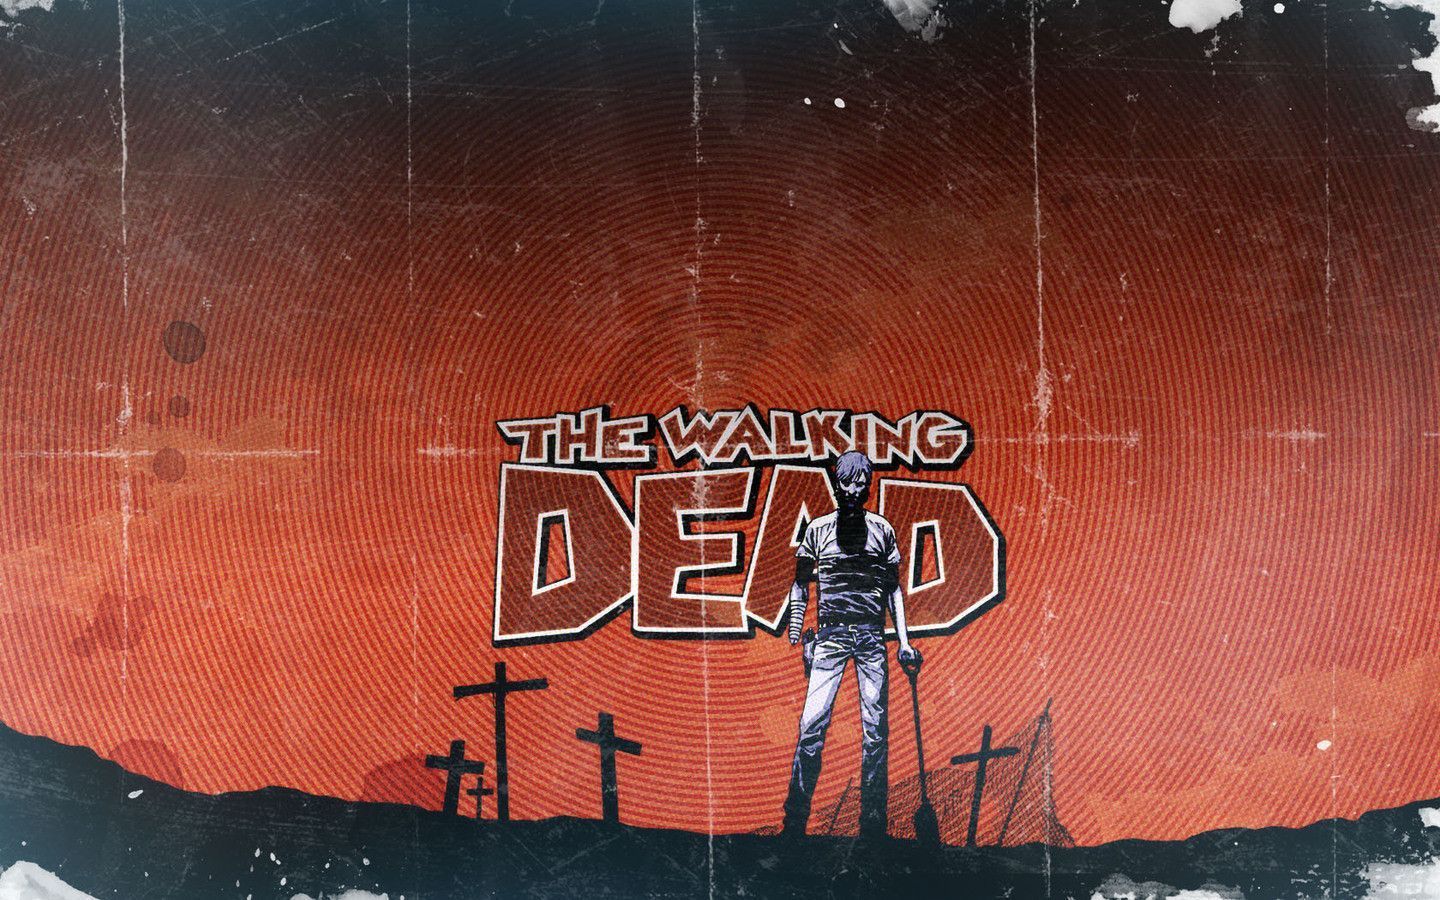 The Walking Dead Comic Wallpaper | Wallpapers, Backgrounds, Images ...